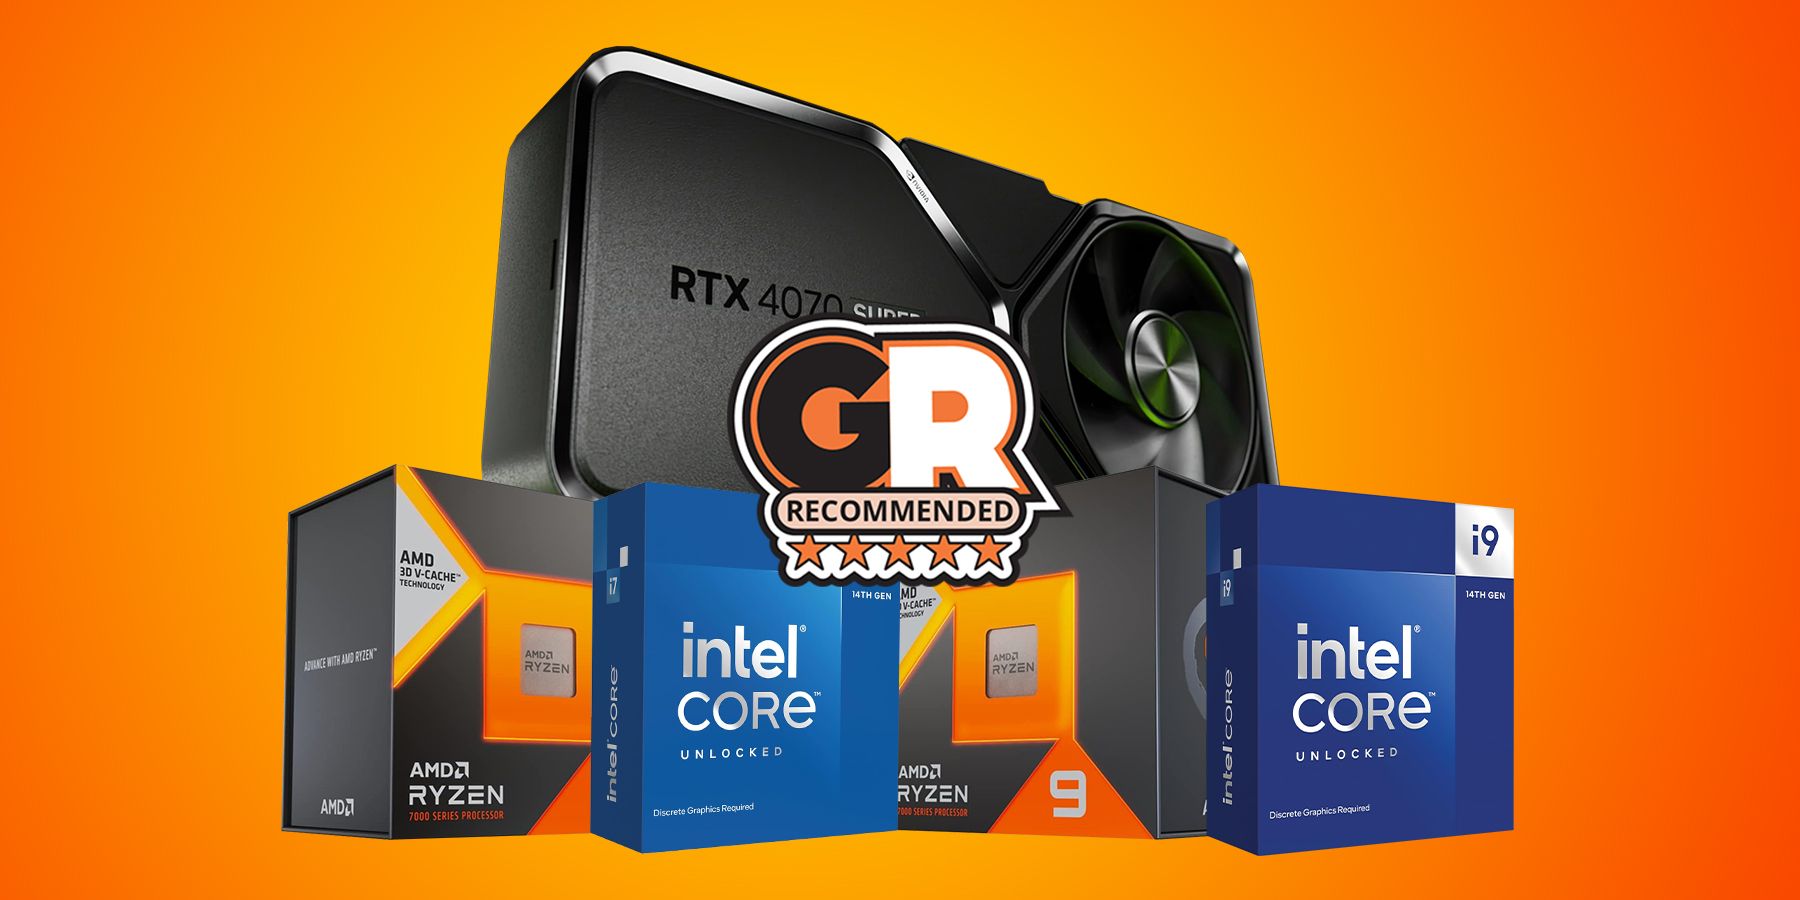 The Best CPUs To Pair With The RTX 4070 SUPER